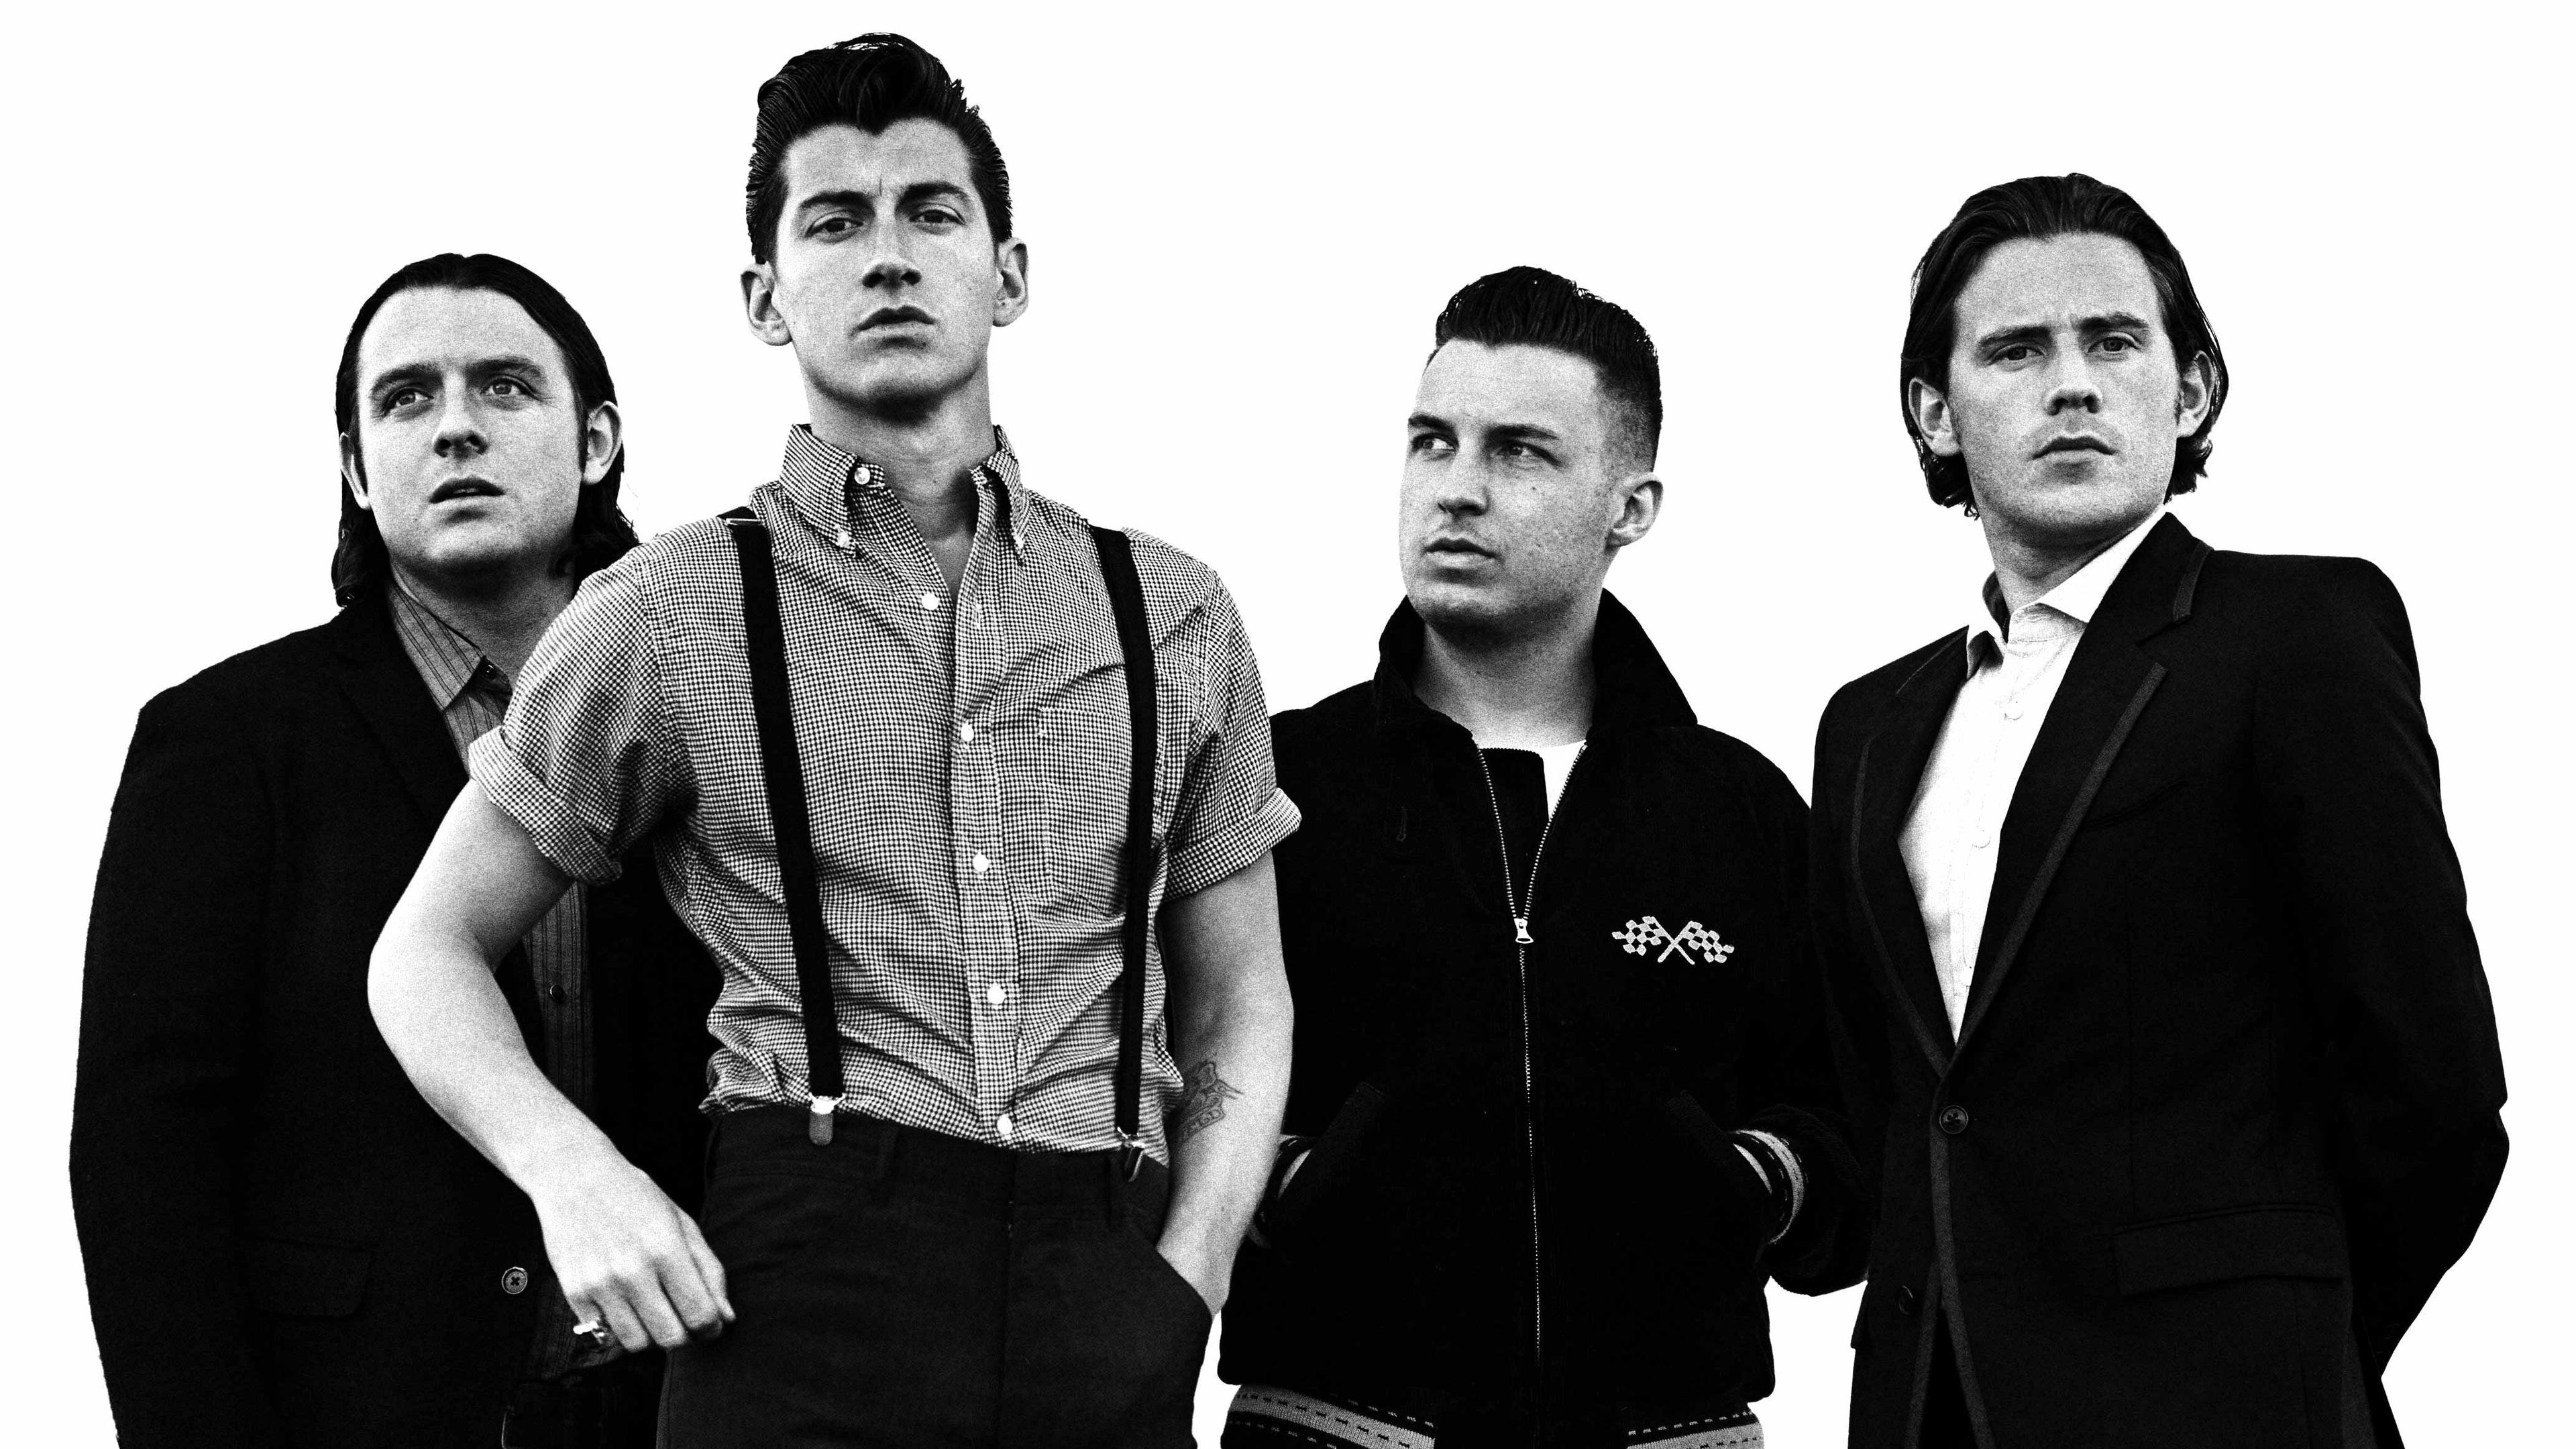 22 Arctic Monkeys HD Wallpapers | Backgrounds - Wallpaper Abyss